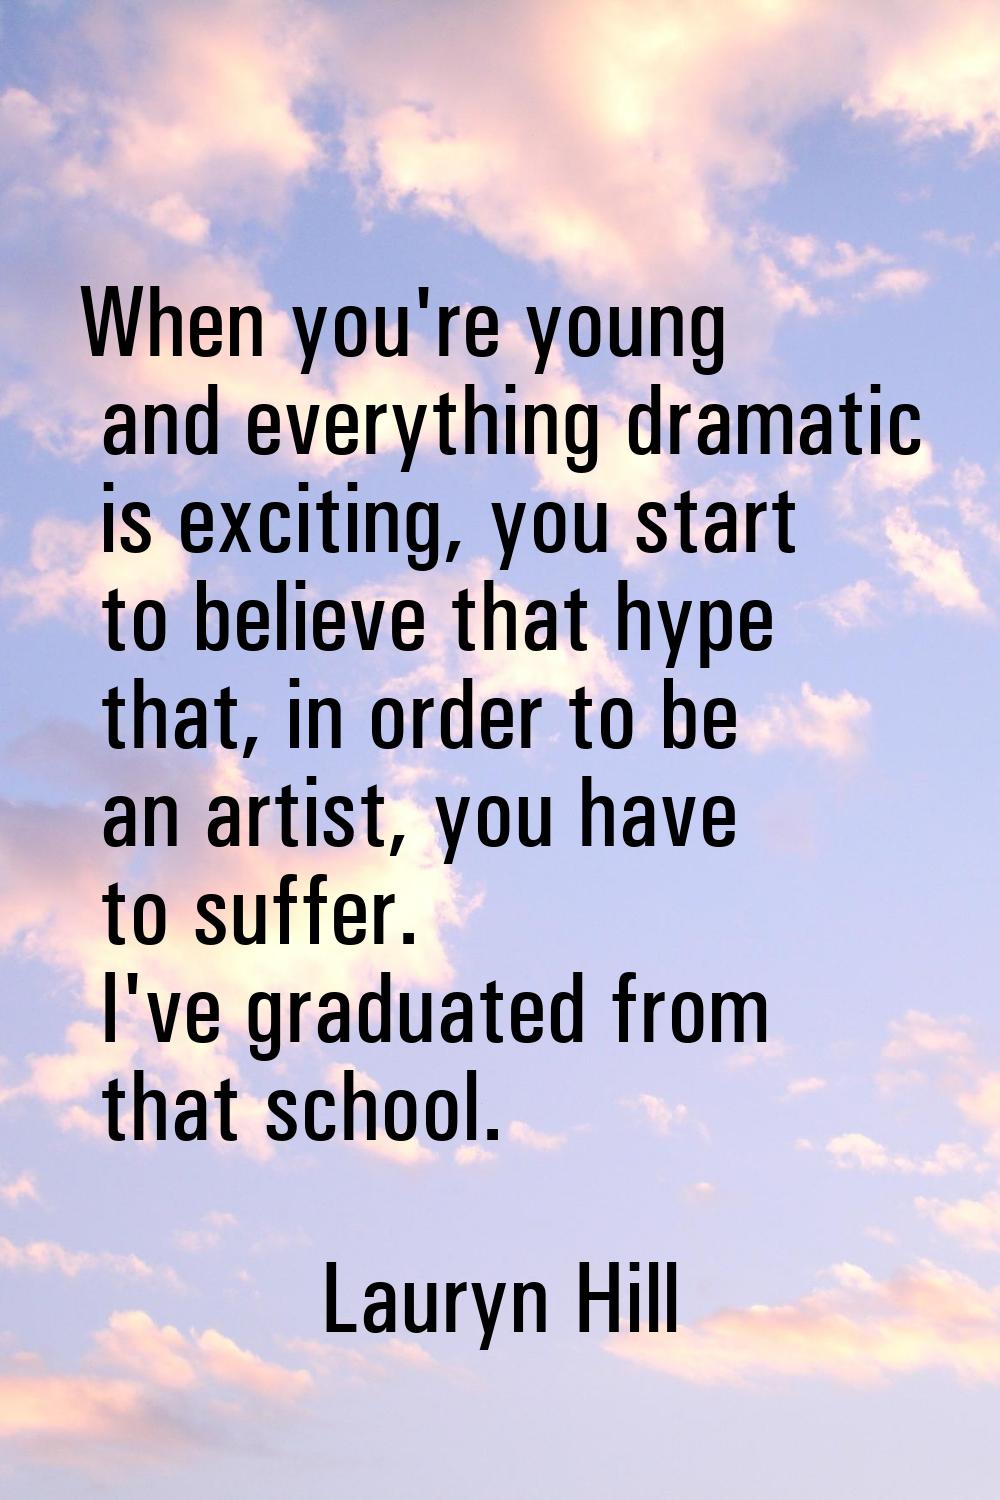 When you're young and everything dramatic is exciting, you start to believe that hype that, in orde